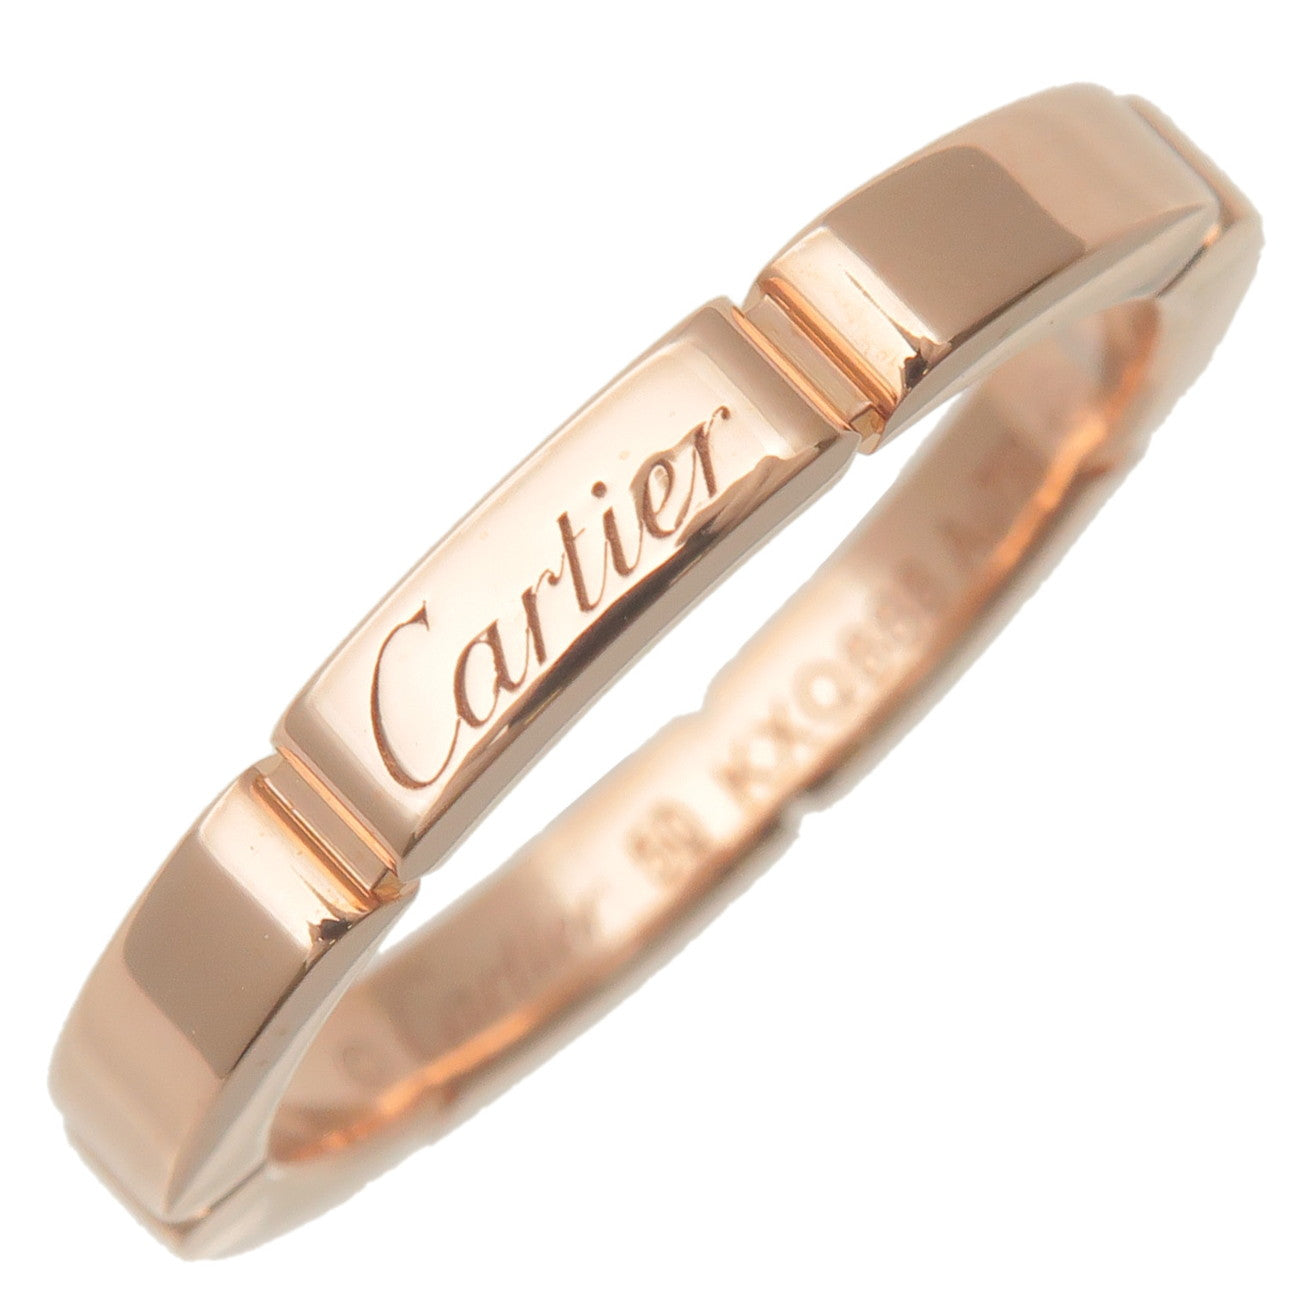 Cartier-Maillon-Panthere-Ring-K18PG-750PG-Rose-Gold-#50-US5.5